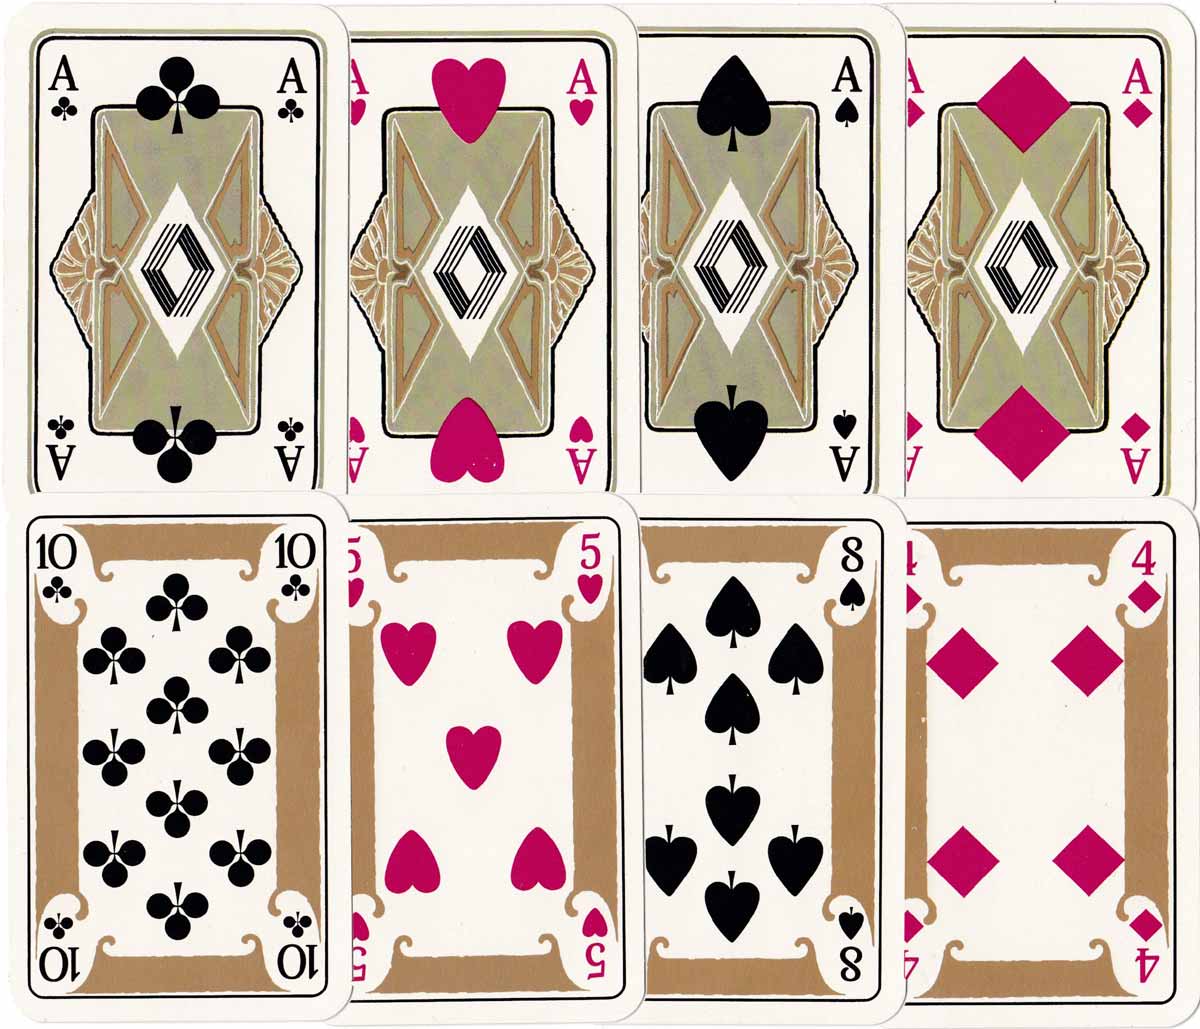 Art nouveau playing cards designed by Otto Benz for Renault, 1987